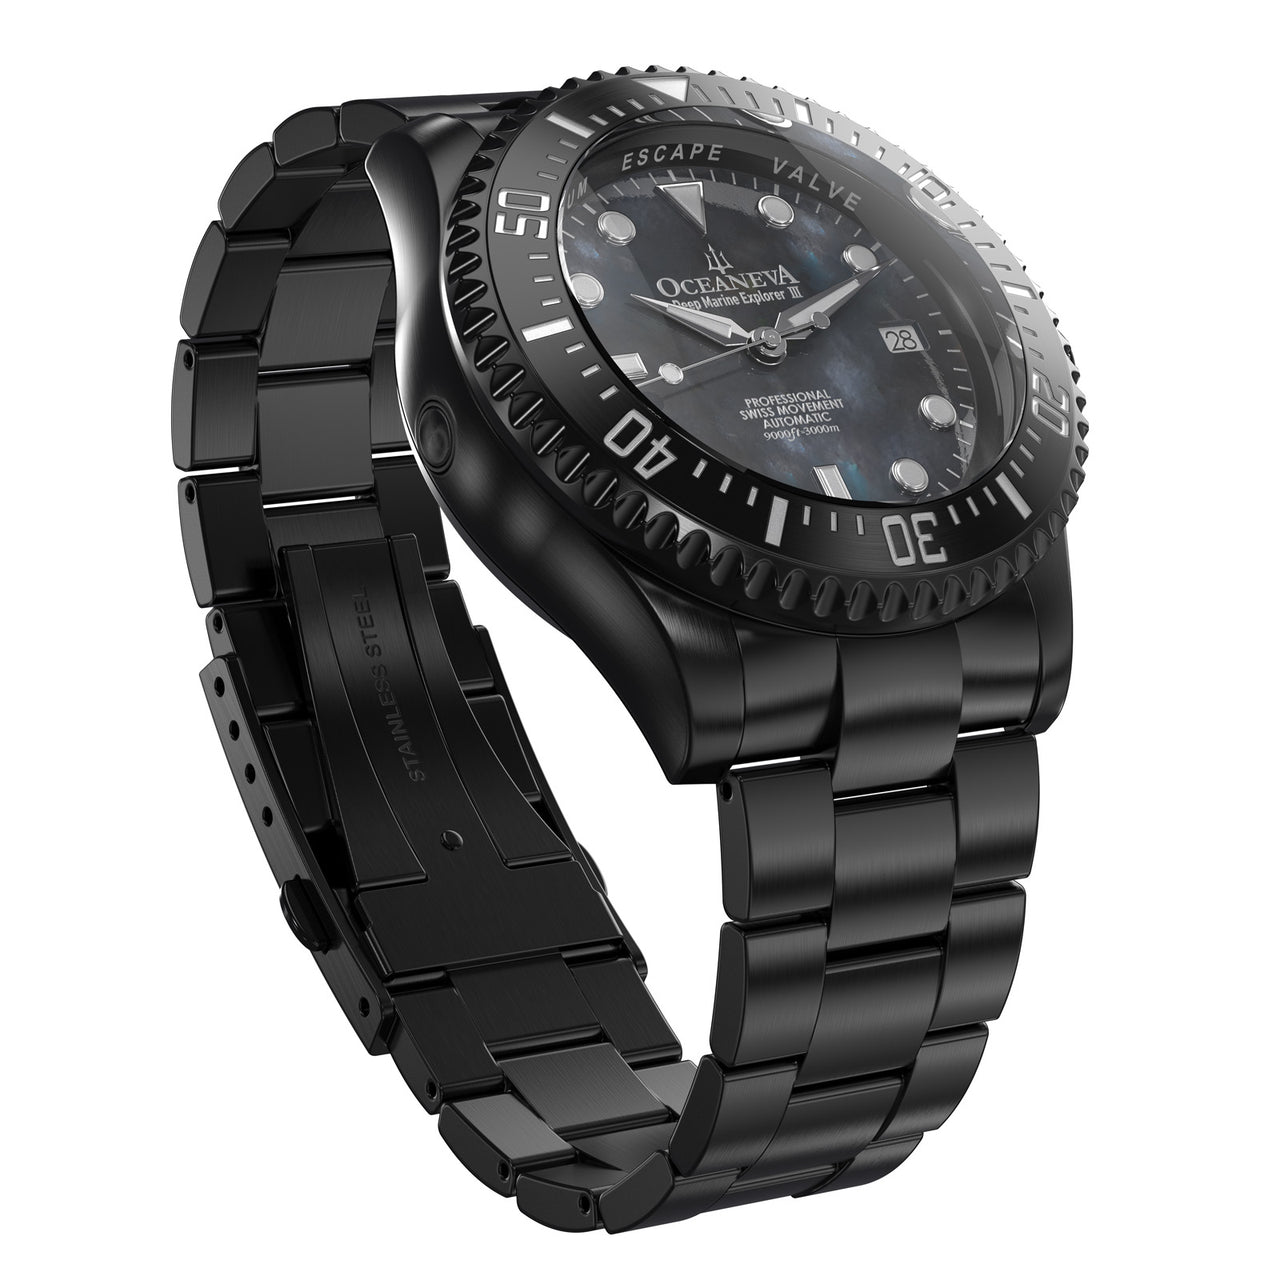 Oceaneva 3000M Dive Watch Gun Metal Gray Mother of Pearl Front Picture Slight Right Slant View